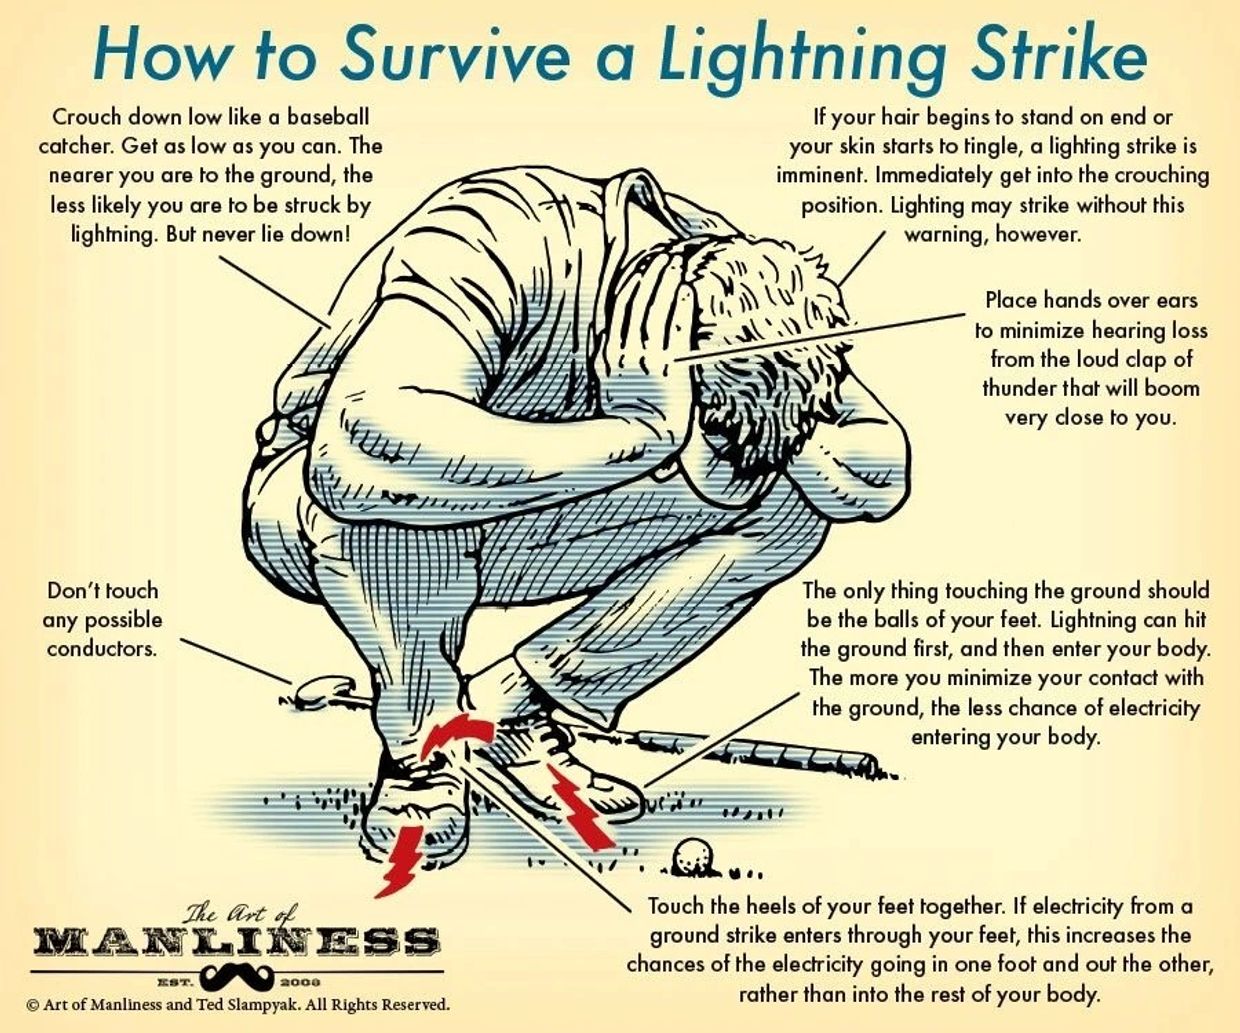 How to survive lightning strike during thunderstorms